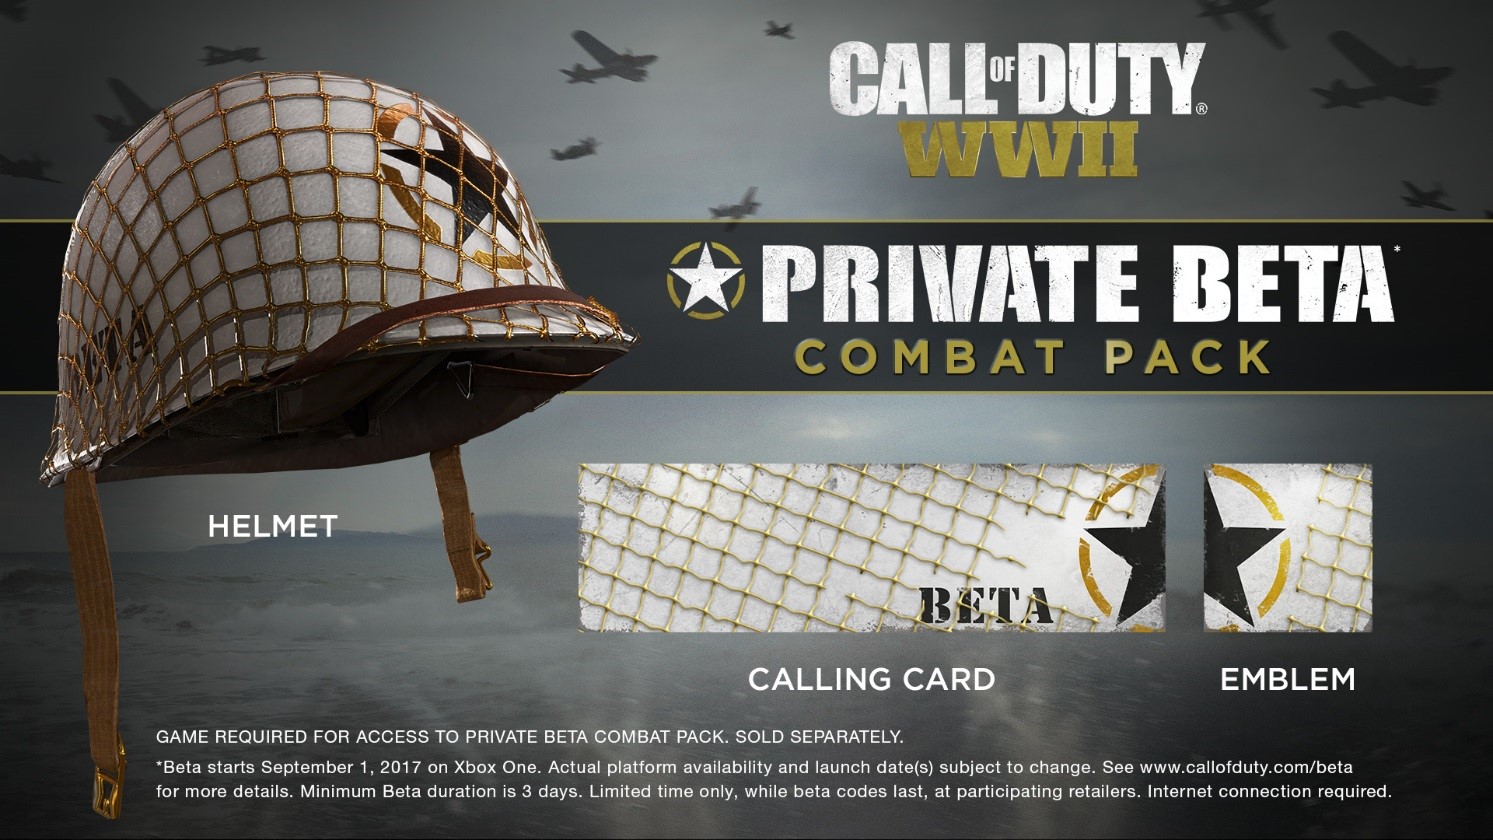 Call of Duty WWII Private Beta Pack